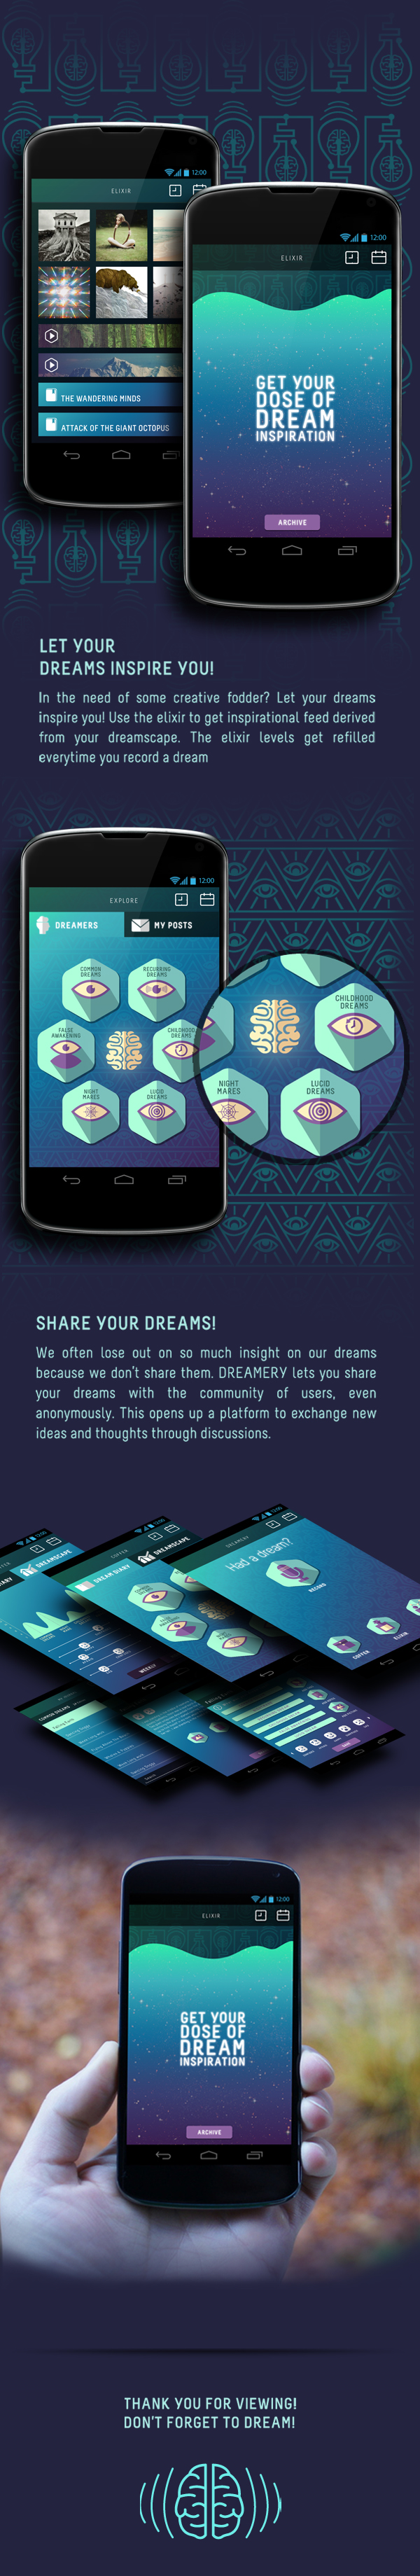 app android Android App dreams Dreaming dream journal inspiration Creativity icons iconography vector record nightmare Lucid Dream Ps25Under25